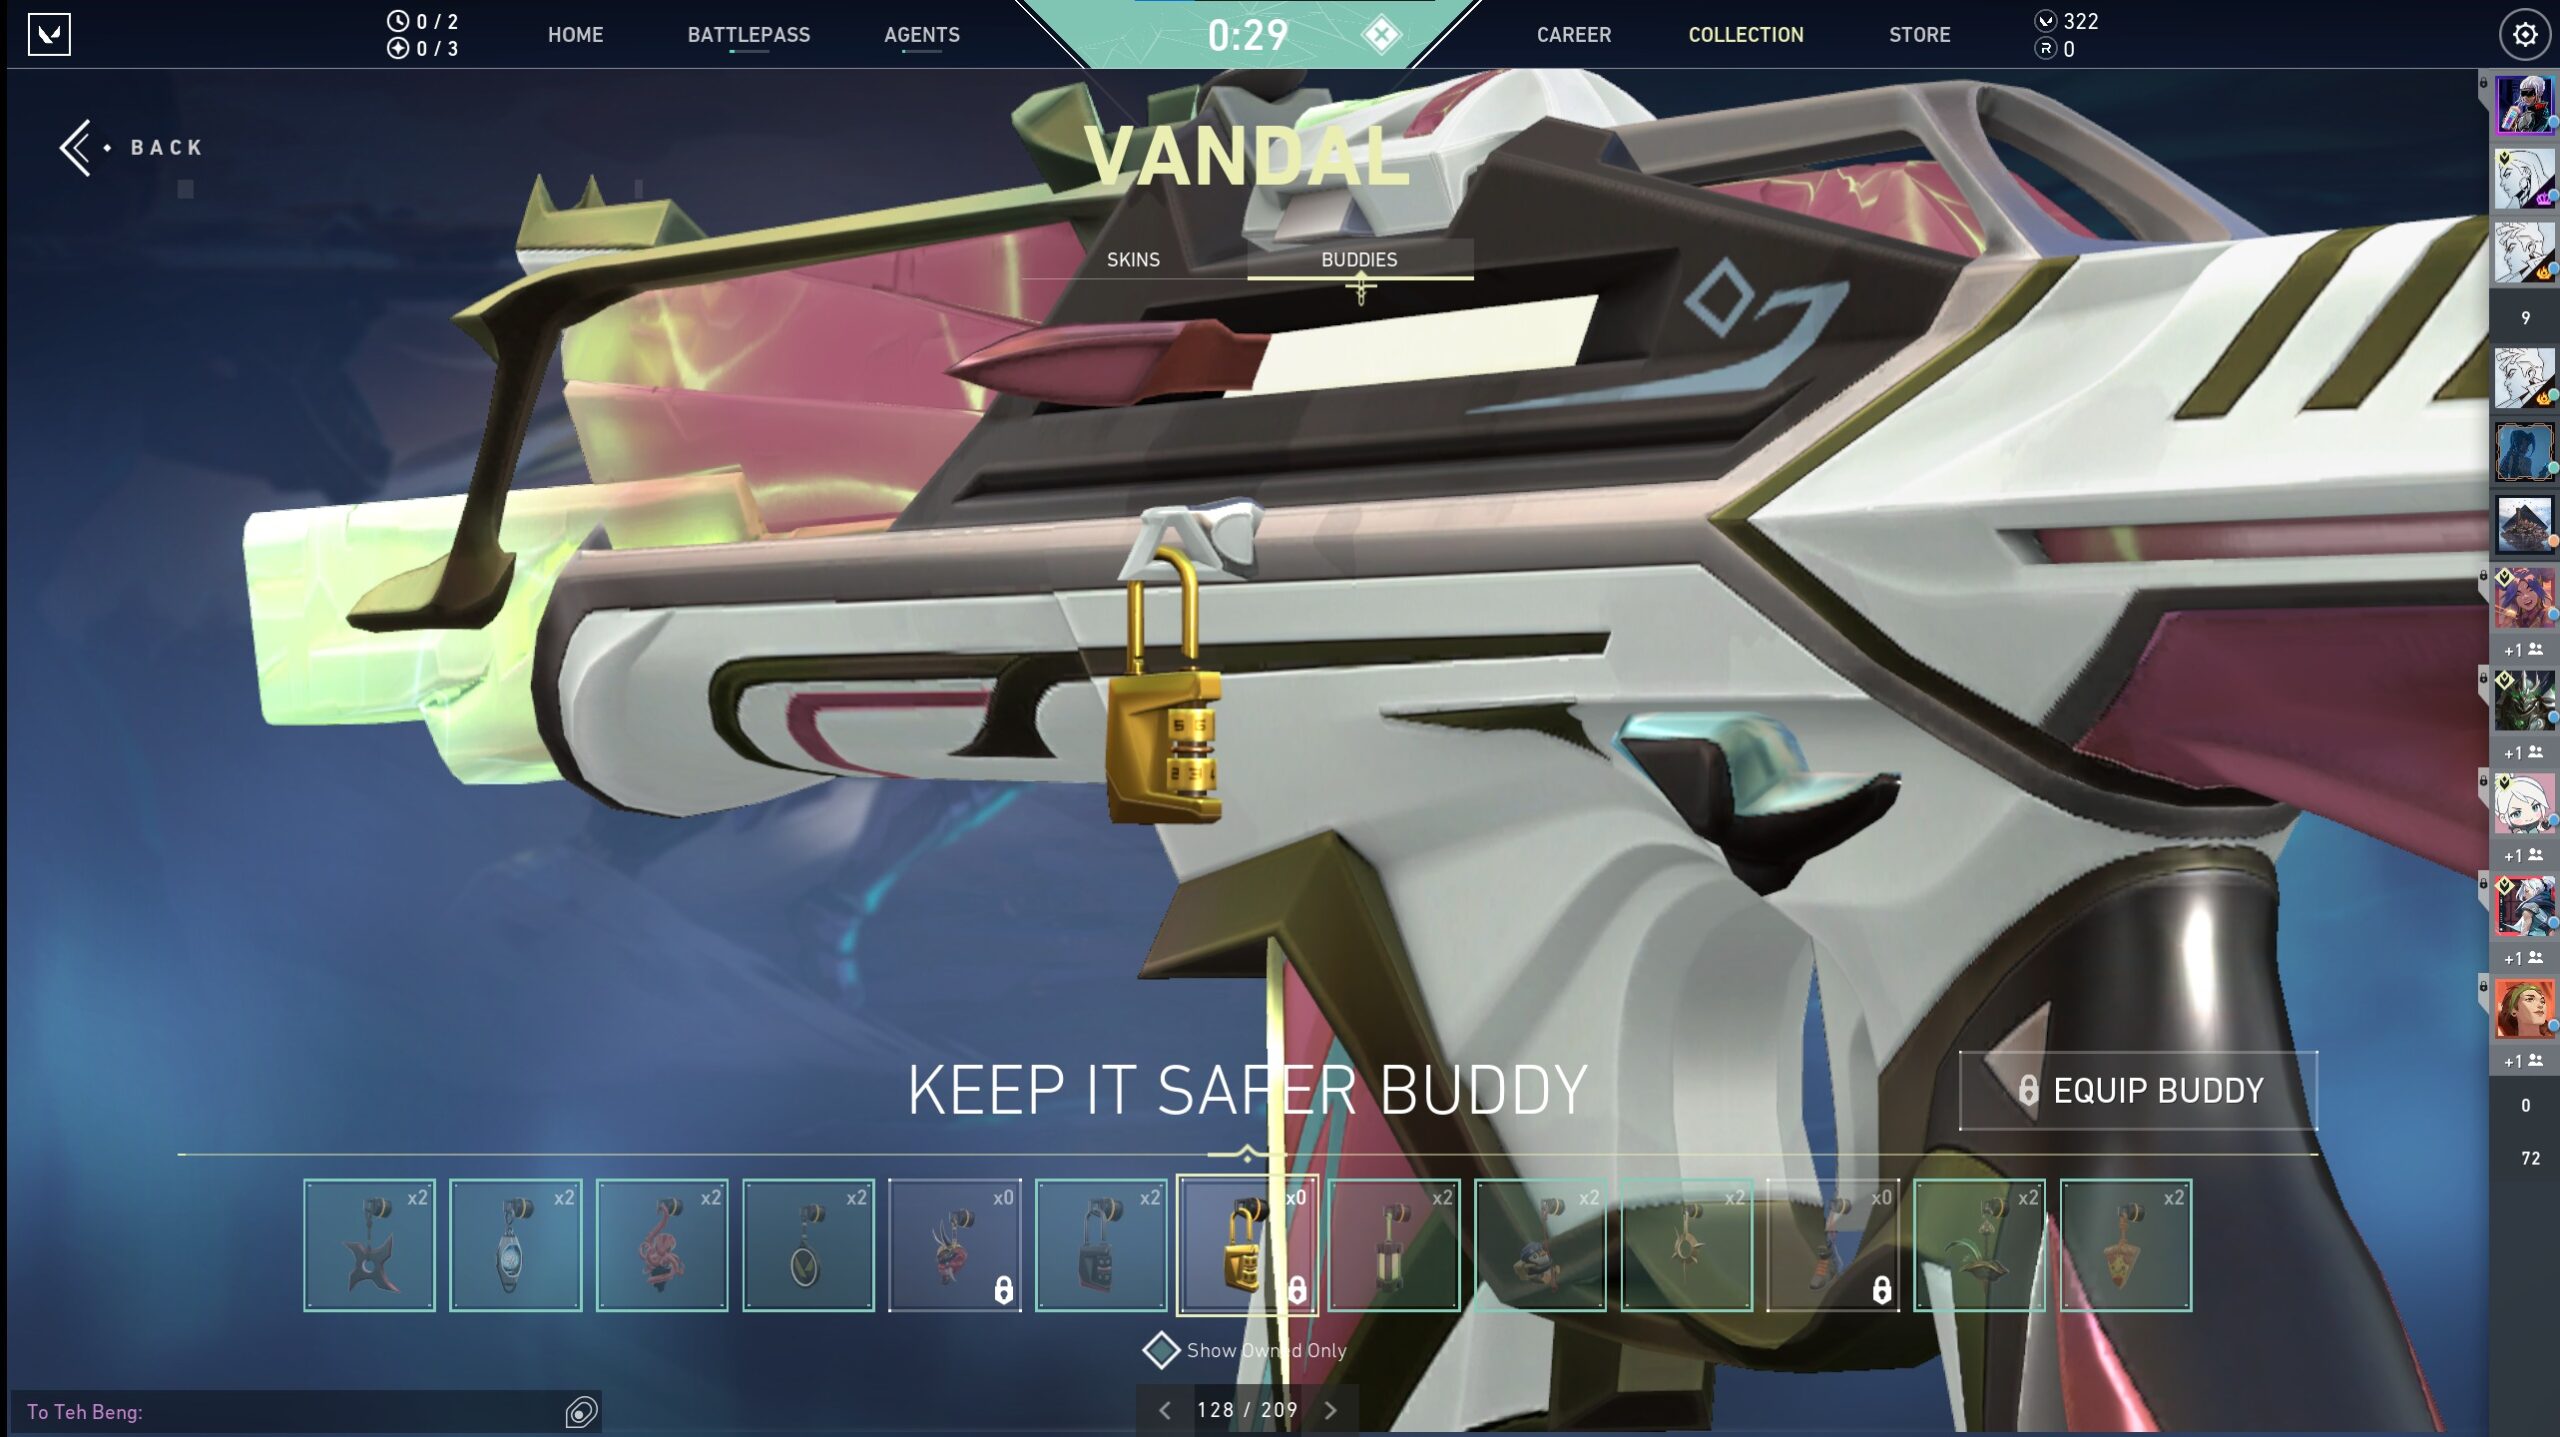 How To Claim 'Keep It Safer' Gun Buddy In Valorant